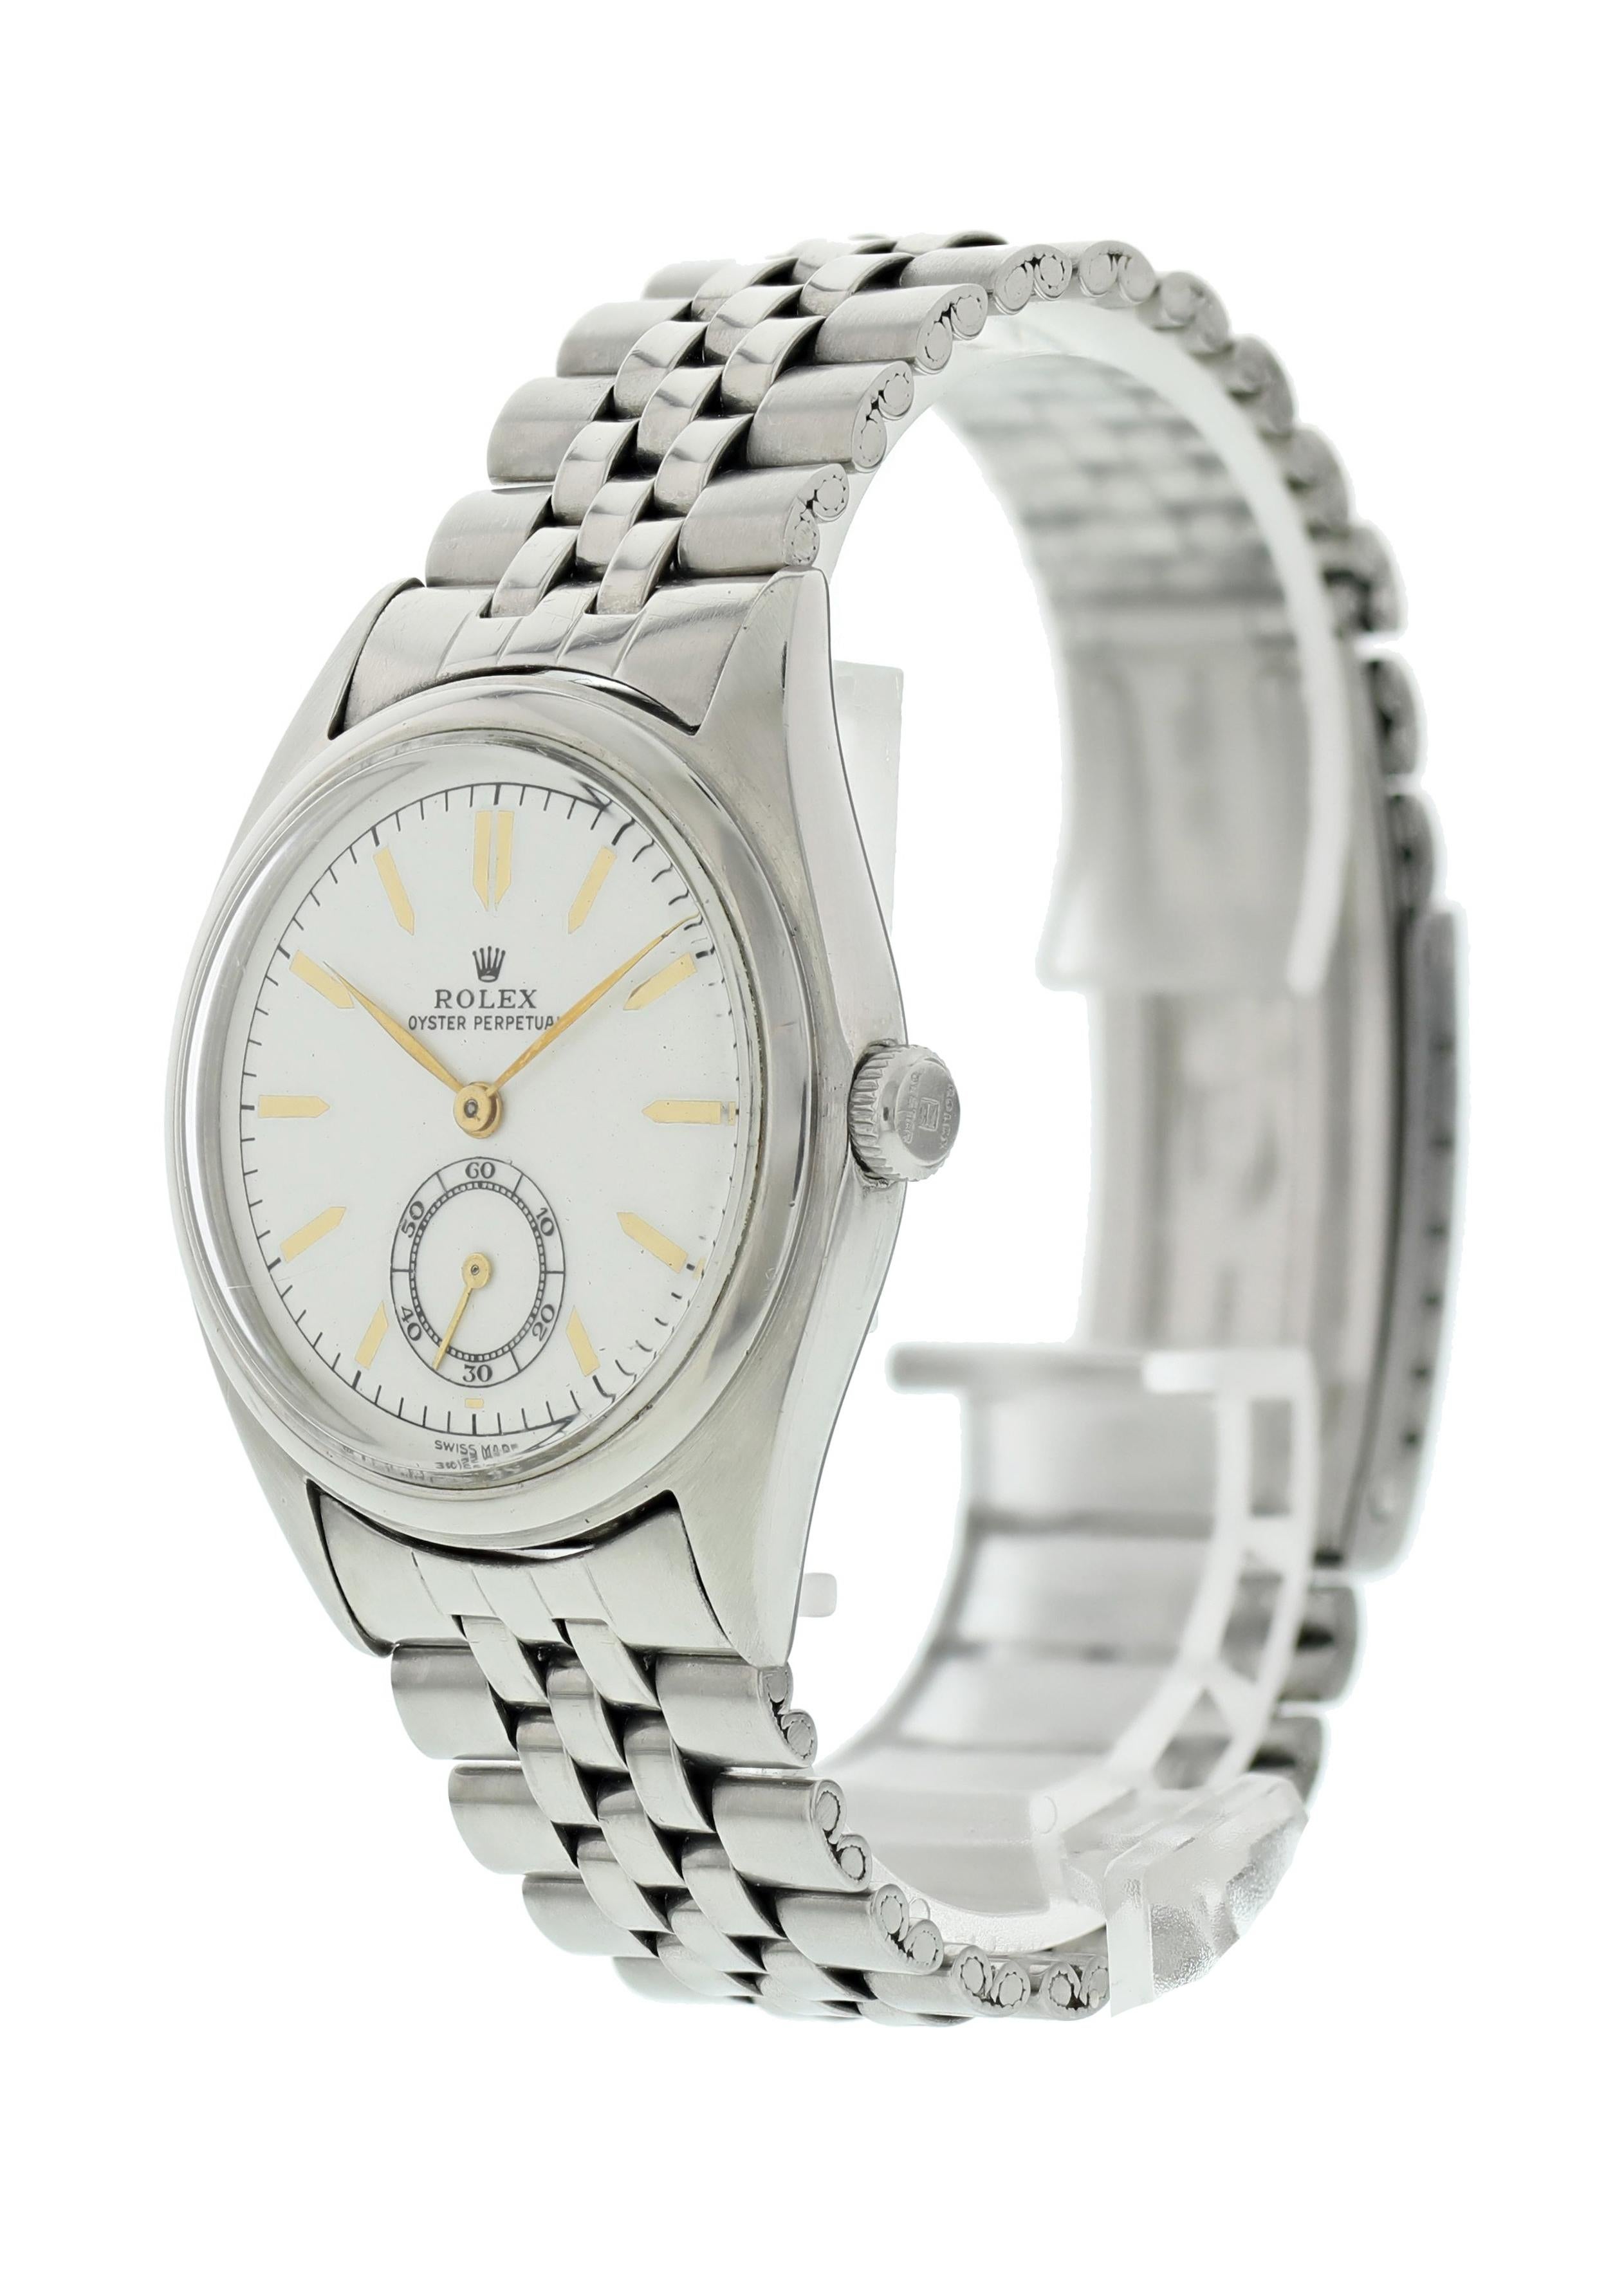 Rolex Oyster Perpetual 5026 Bubble Back  Men's Watch. 36mm stainless steel case with smooth bezel. Rare white gloss dial with gold hands and indexes. Small seconds subdial Minute markers on the outer dial. 19mm jubilee bracelet with a fold over